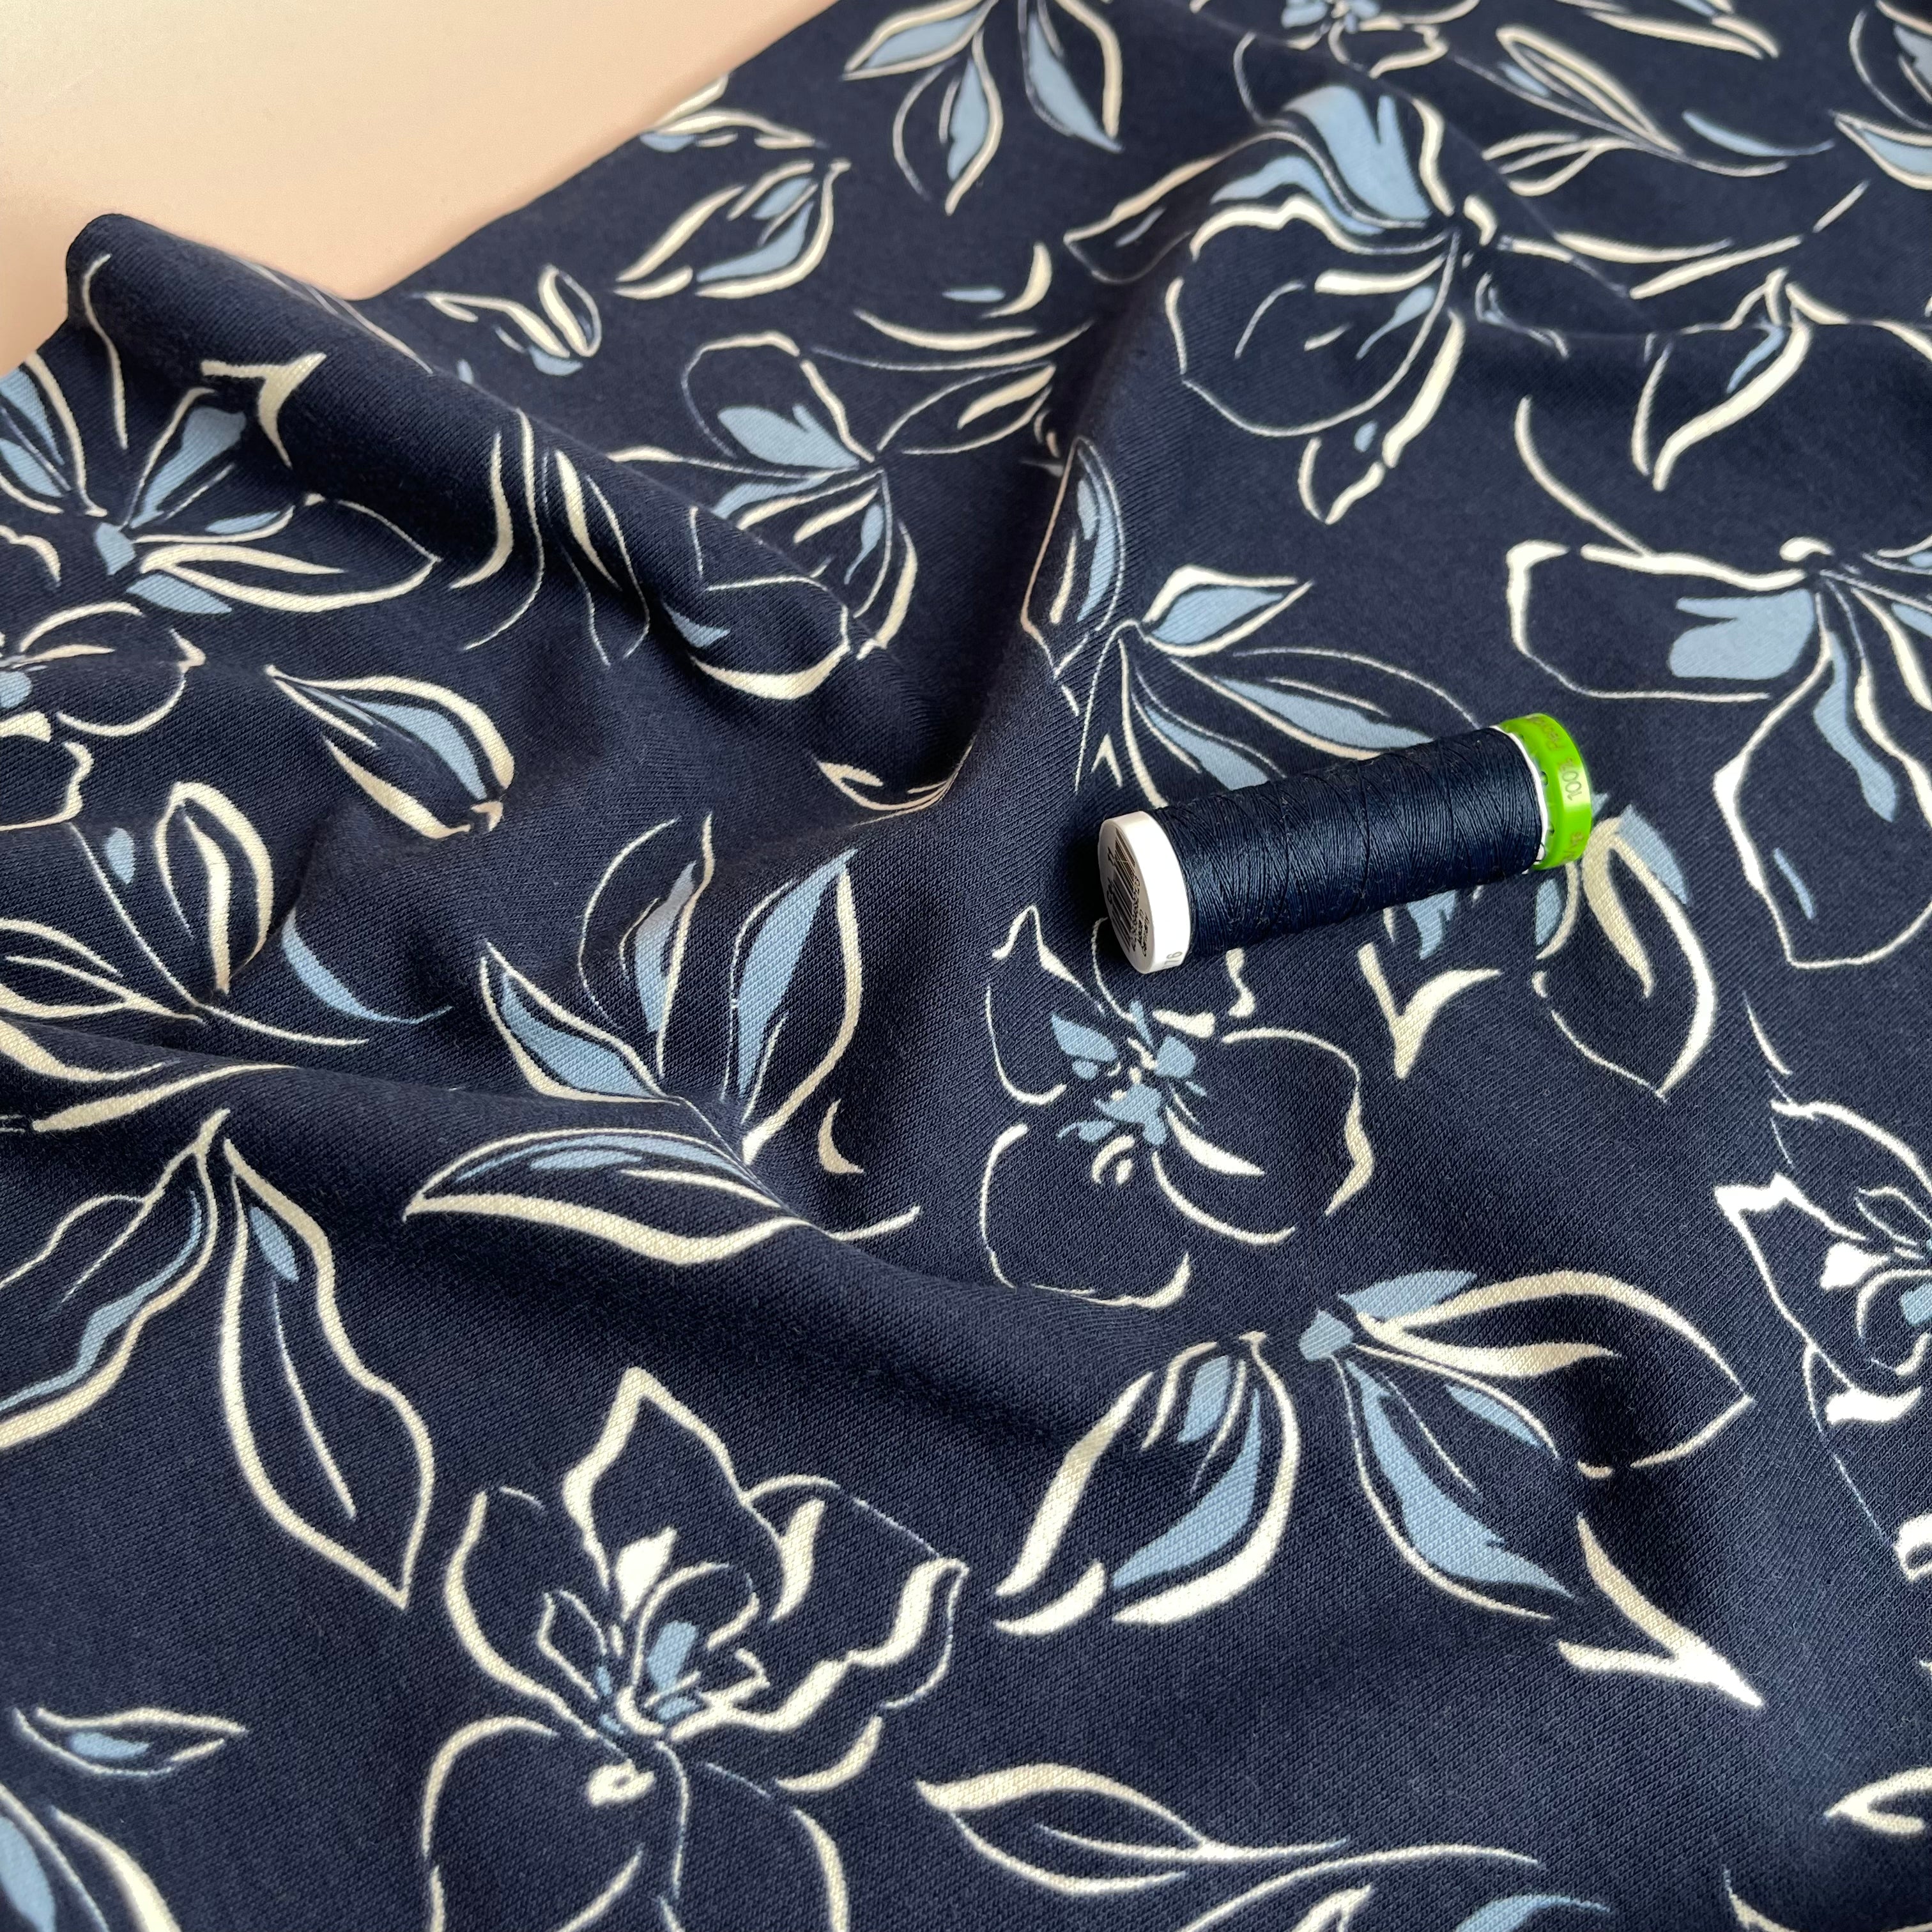 REMNANT 1.30 Metres - Line Flowers on Navy Recycled Cotton French Terry